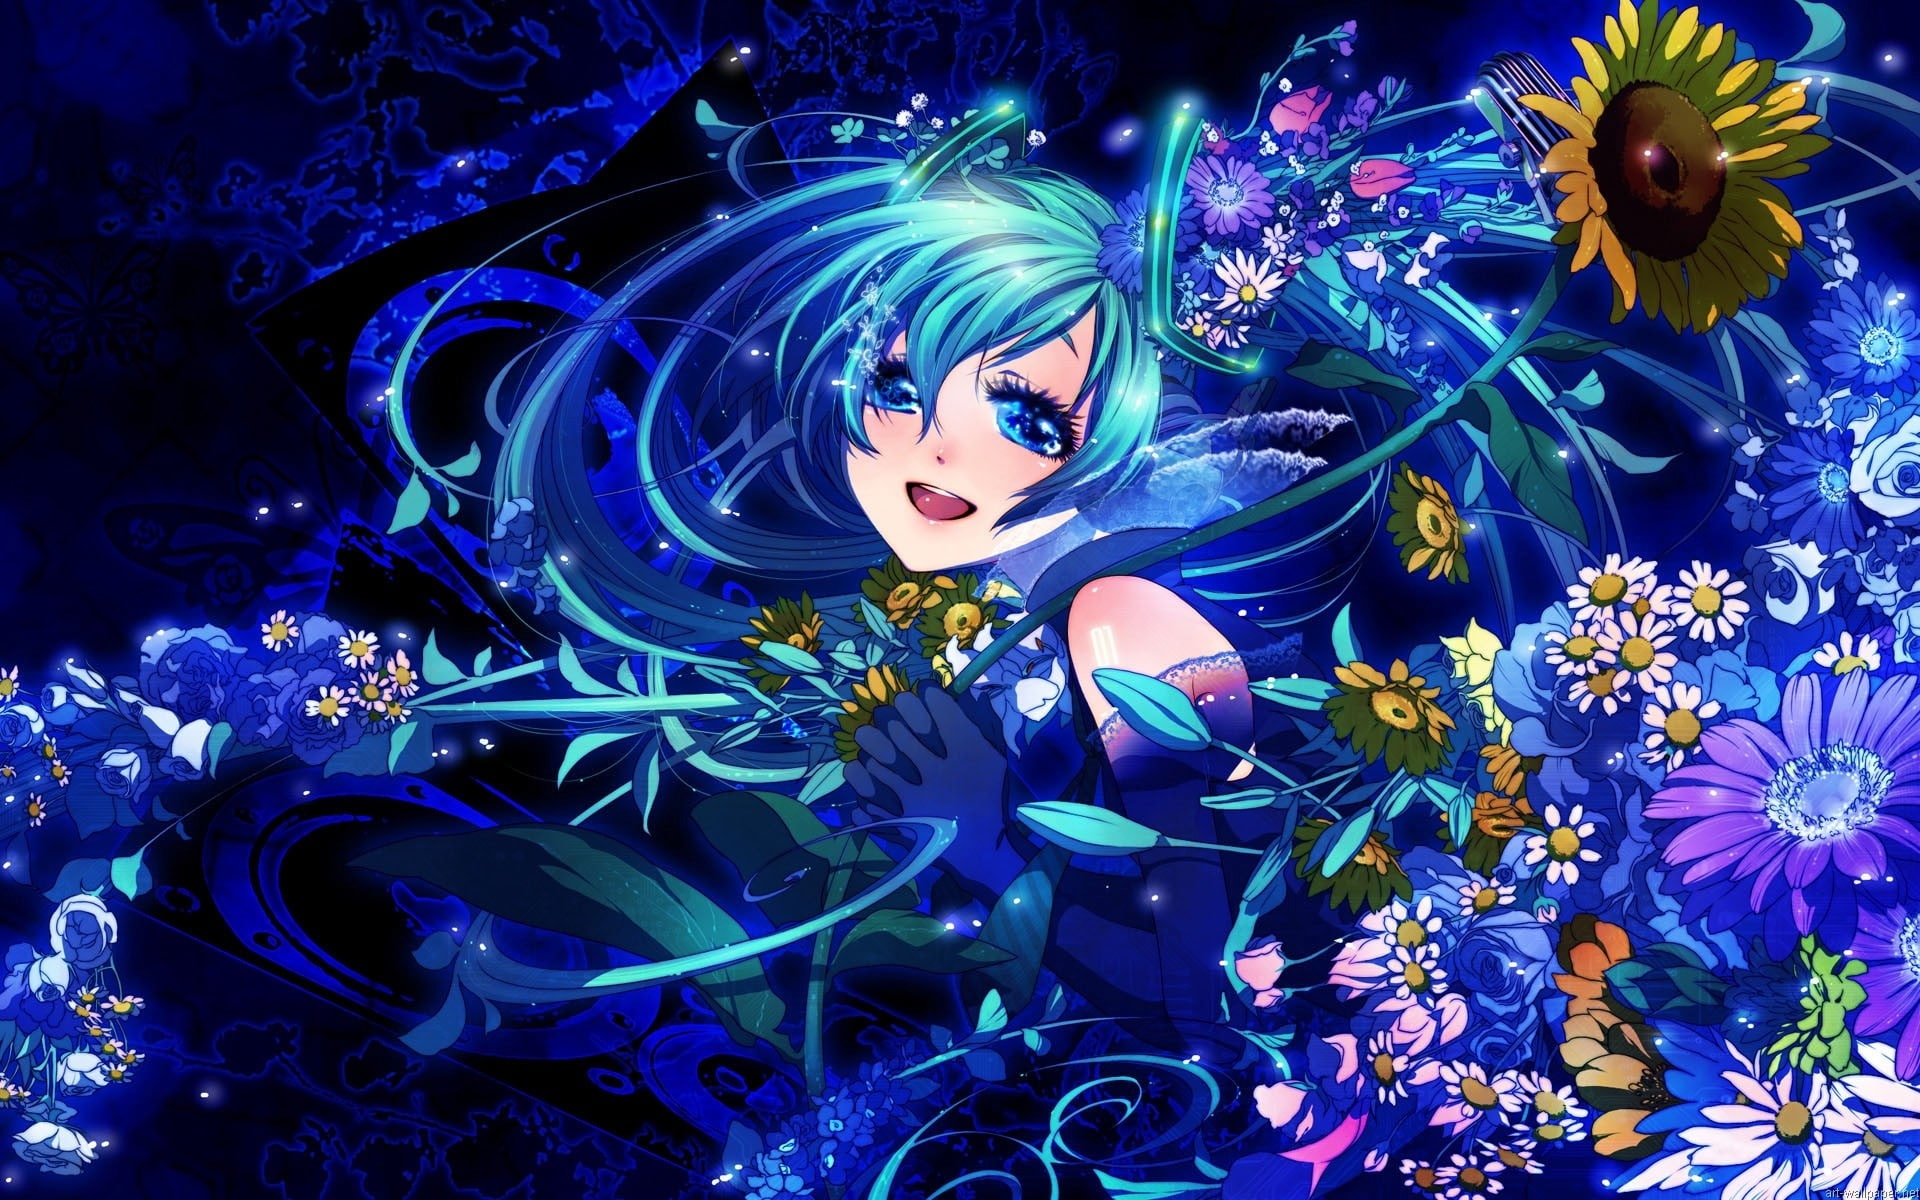 Girl with blue hair with flowers - wide 6